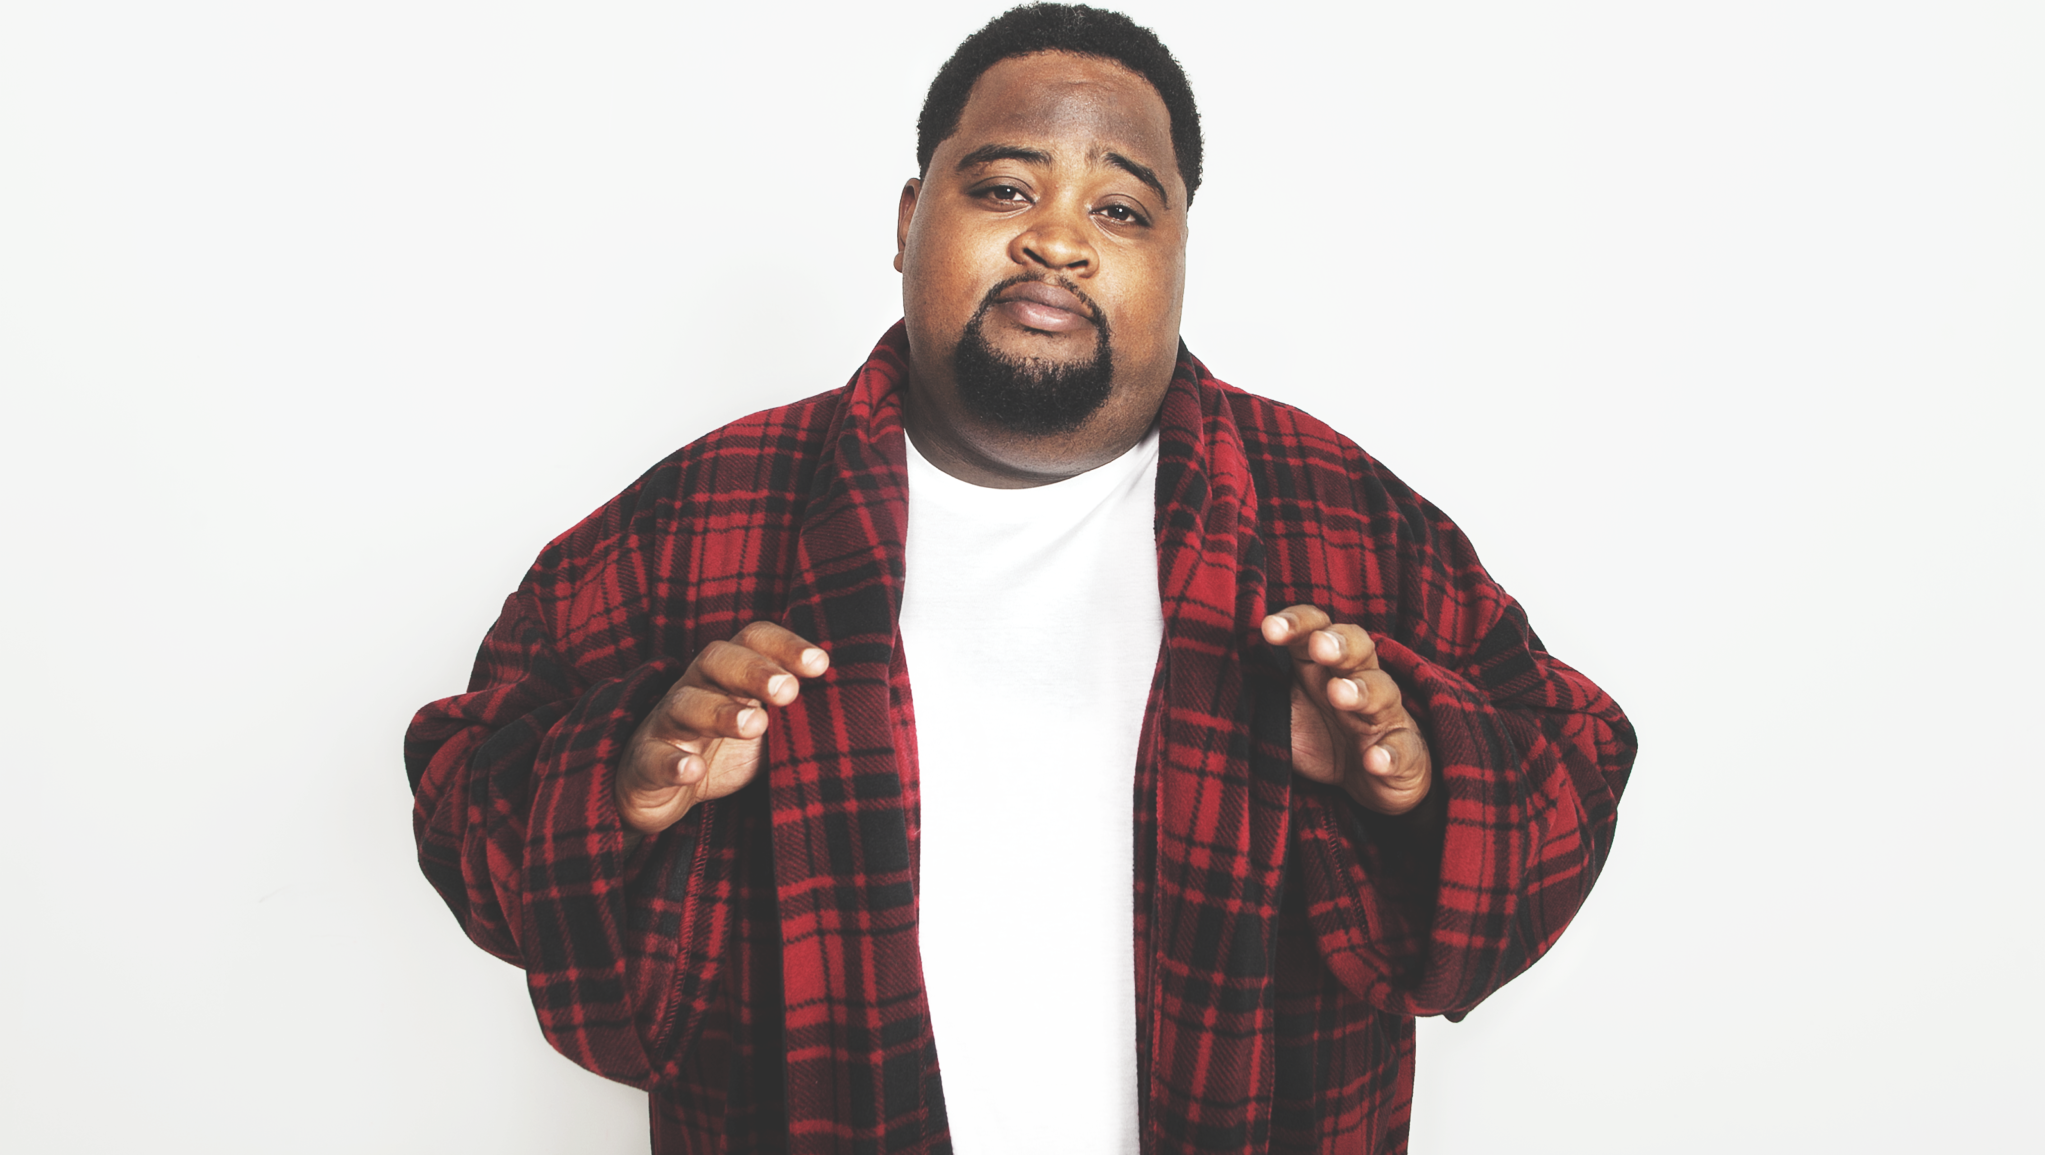 LunchMoney Lewis is banking on 'Bills'